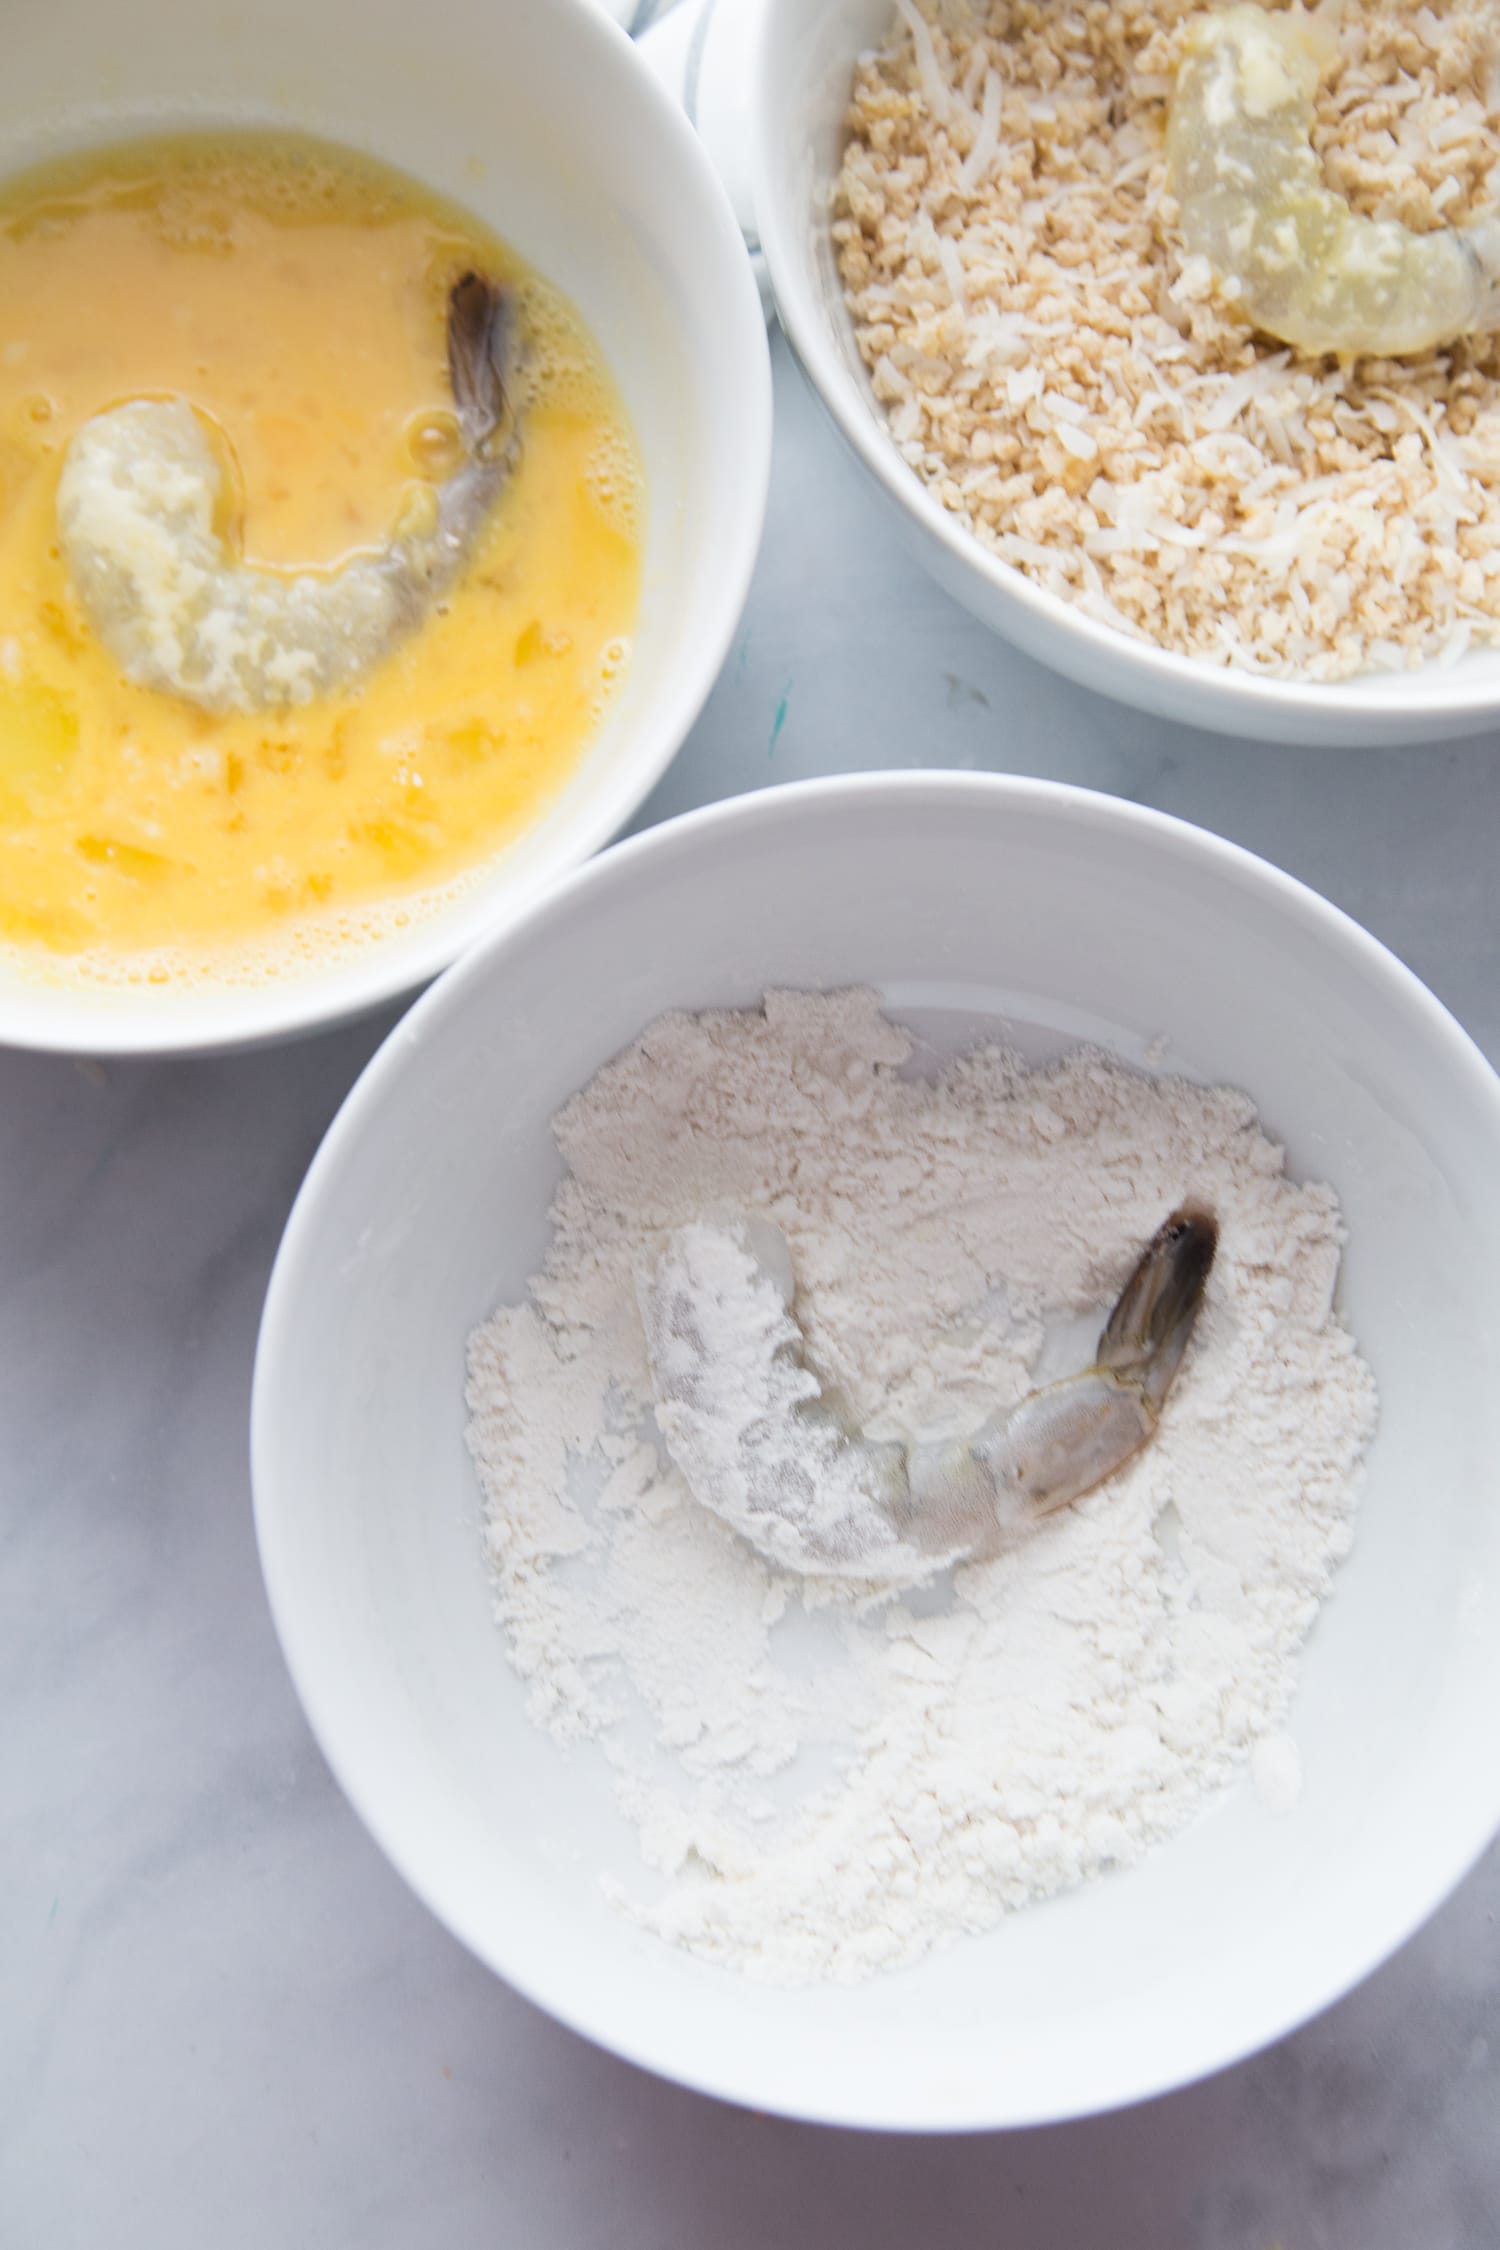 Three white bowls on a marble backdrop - one has egg with a shrimp, one has gluten free flour with shrimp, and one has panko breadcrumb with shrimp. 